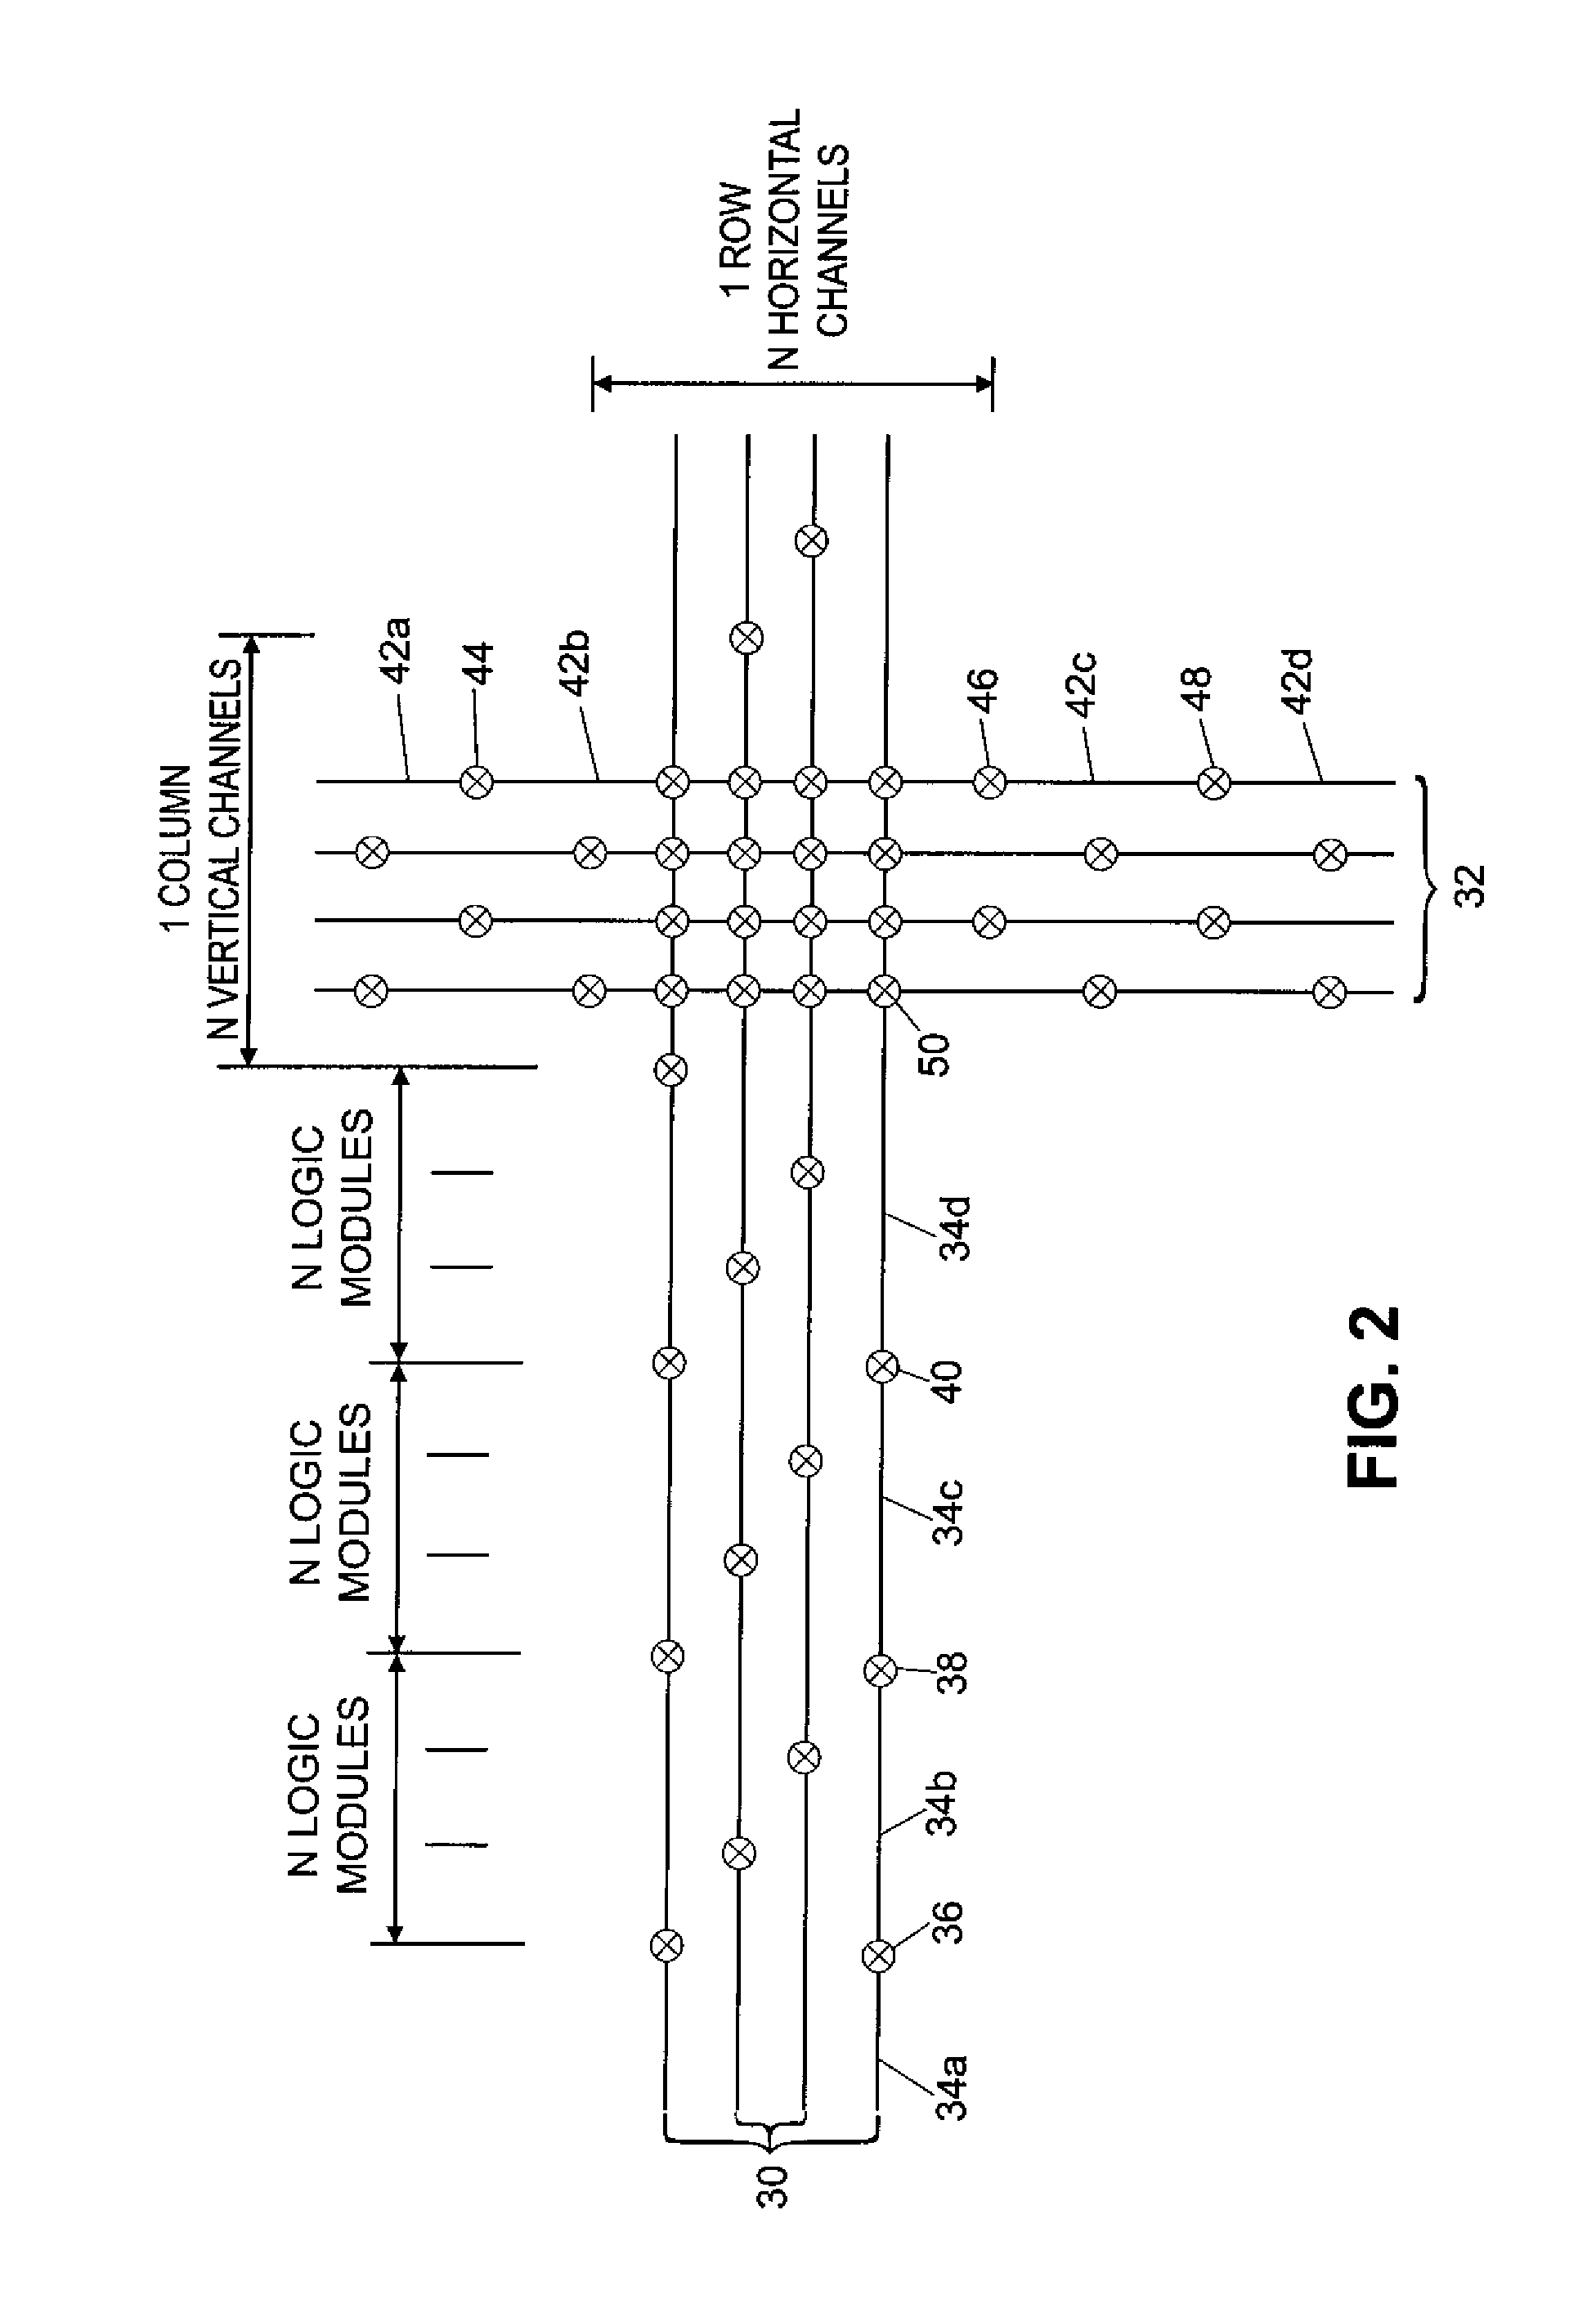 Programmable system on a chip